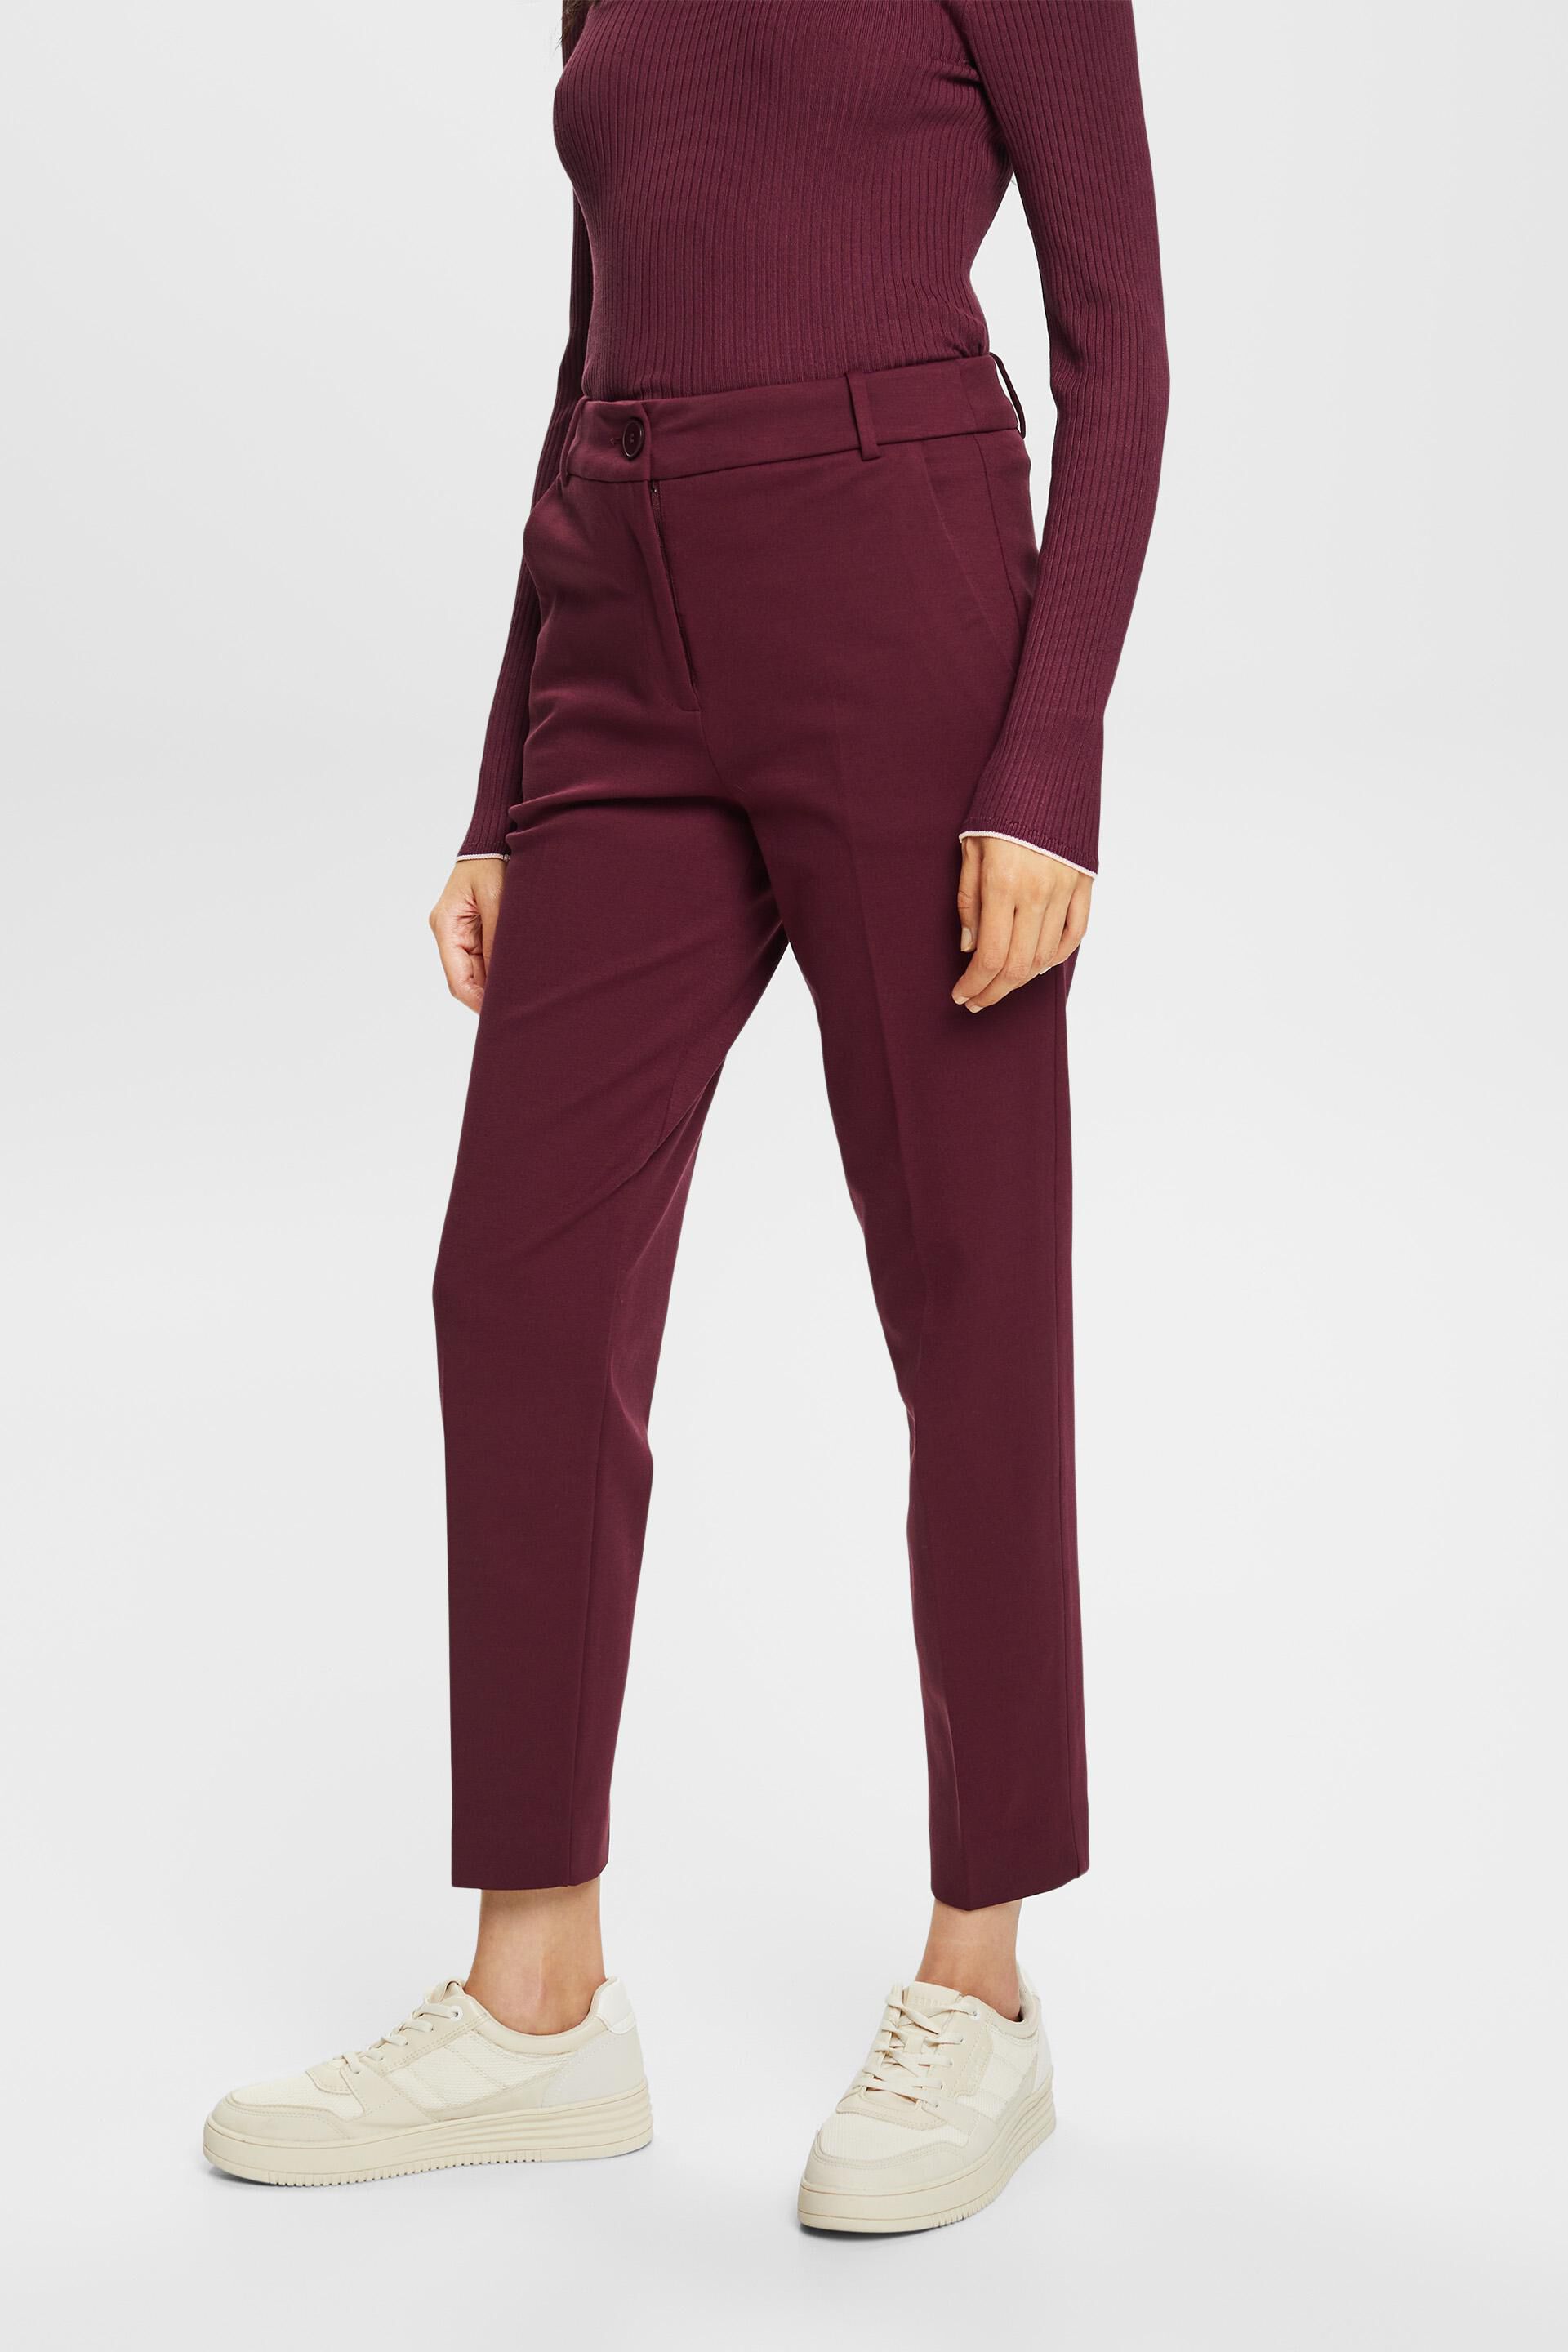 Esprit PUNTO tapered & mix match trousers SPORTY